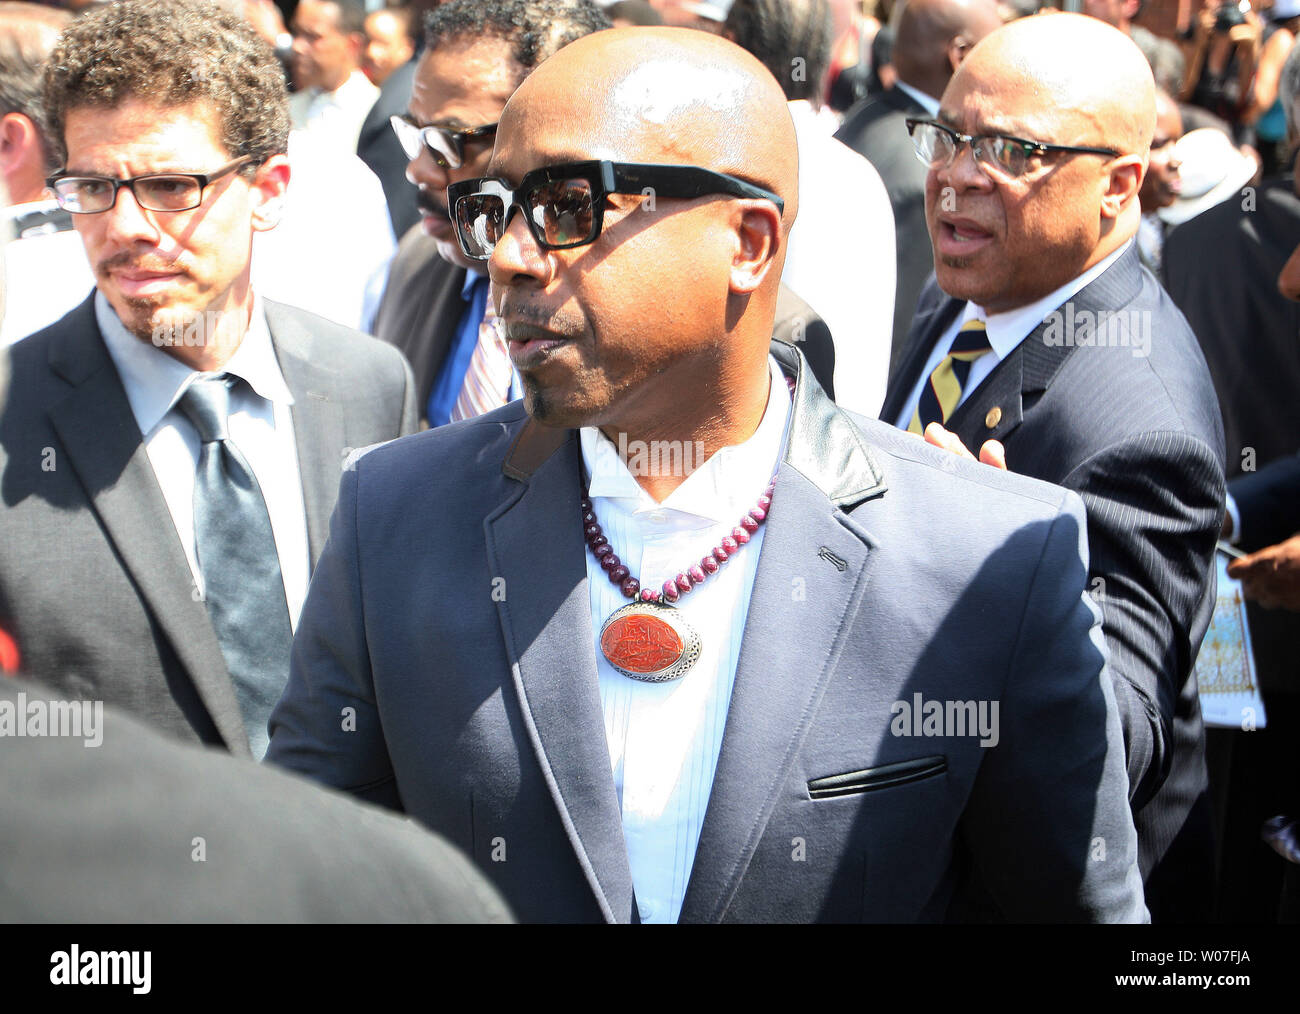 Rapper MC Hammer leaves the Friendly Temple Missionary Baptist Church at the completion of the funeral for Michael Brown Jr. in St. Louis on August 25, 2014. Brown gained attention after was shot by a white Ferguson, Missouri police officer on August 9 and was unarmed. The shooting led to several nights of looting, arrests and heavy police presence.   UPI/Bill Greenblatt Stock Photo